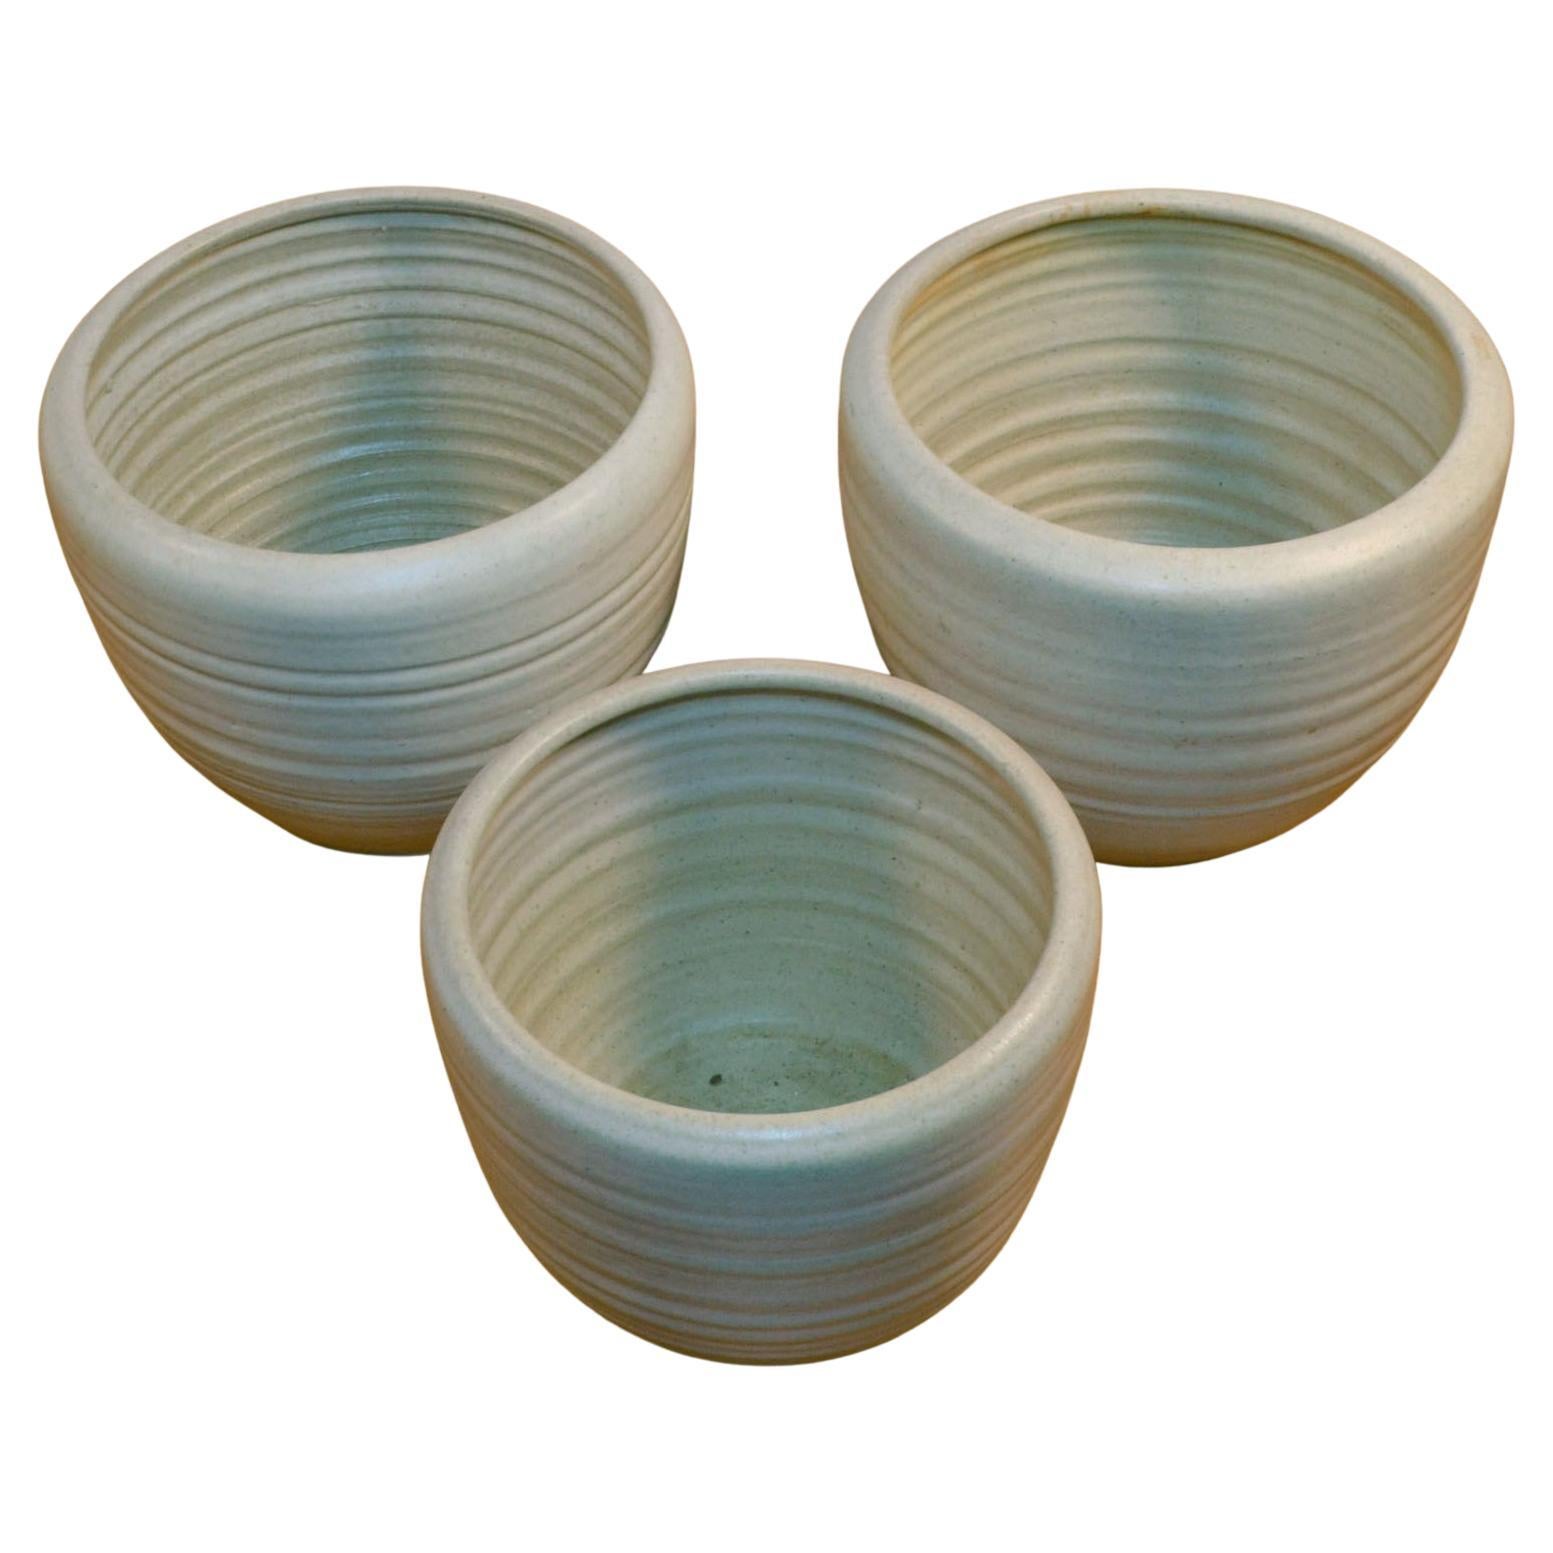 Set of four studio pottery planters in different sizes created on the turning wheel by sophisticated and advanced skilled Dutch ceramist in the 1980's. The warm lustrous oat white and pale yellow glazes of Mobach are inspired by the highly